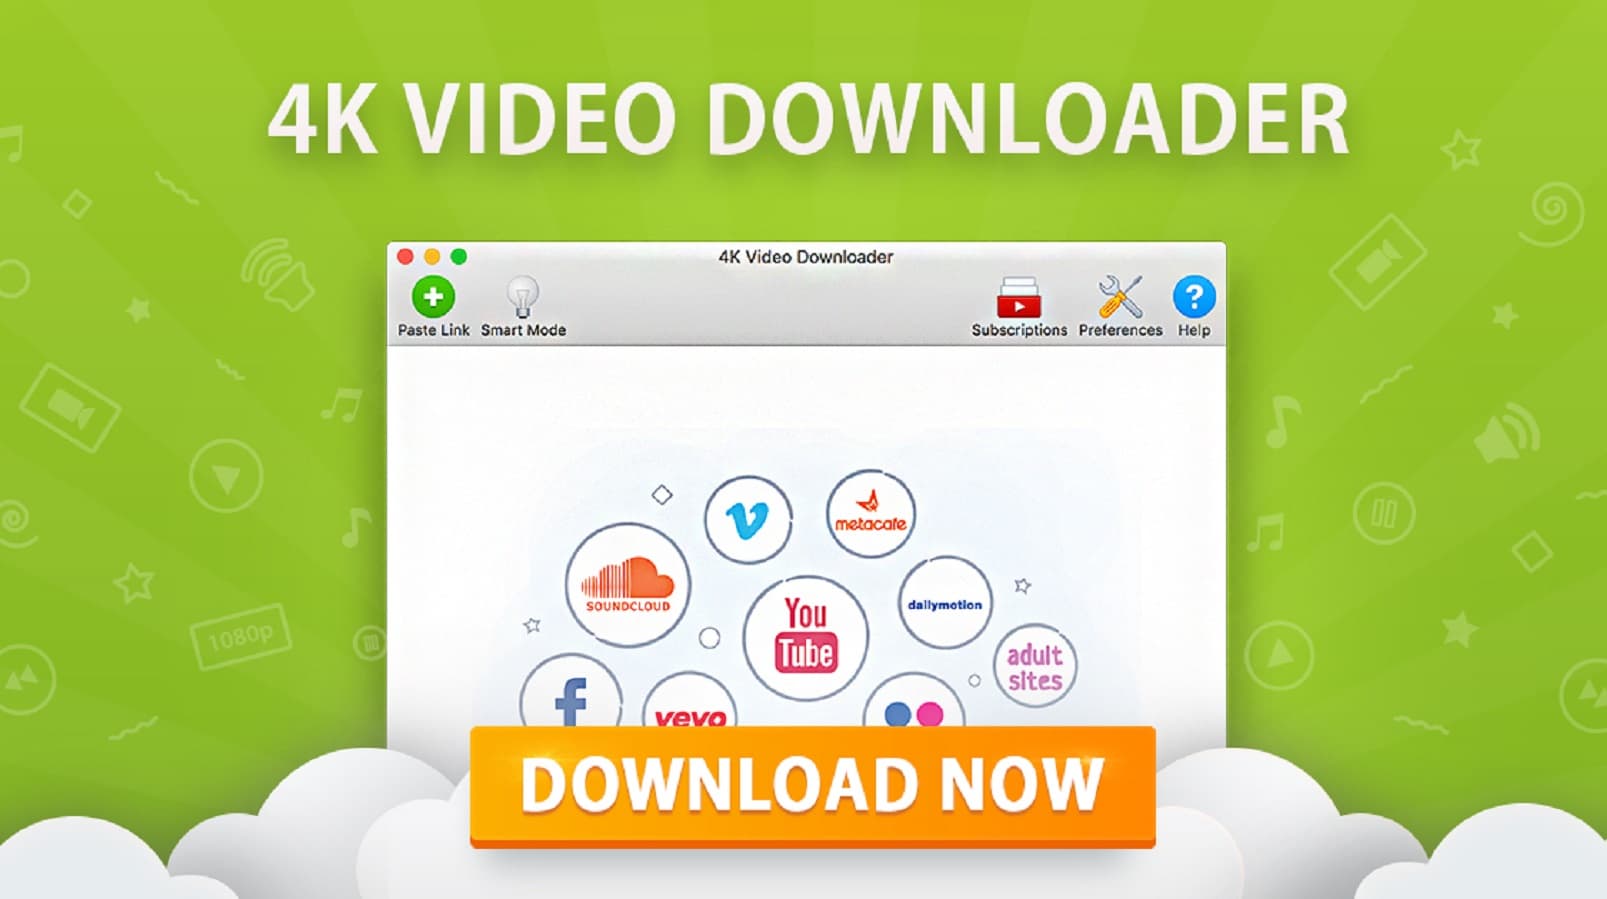 This 4K Video Downloader is the easiest way to download YouTube playlists